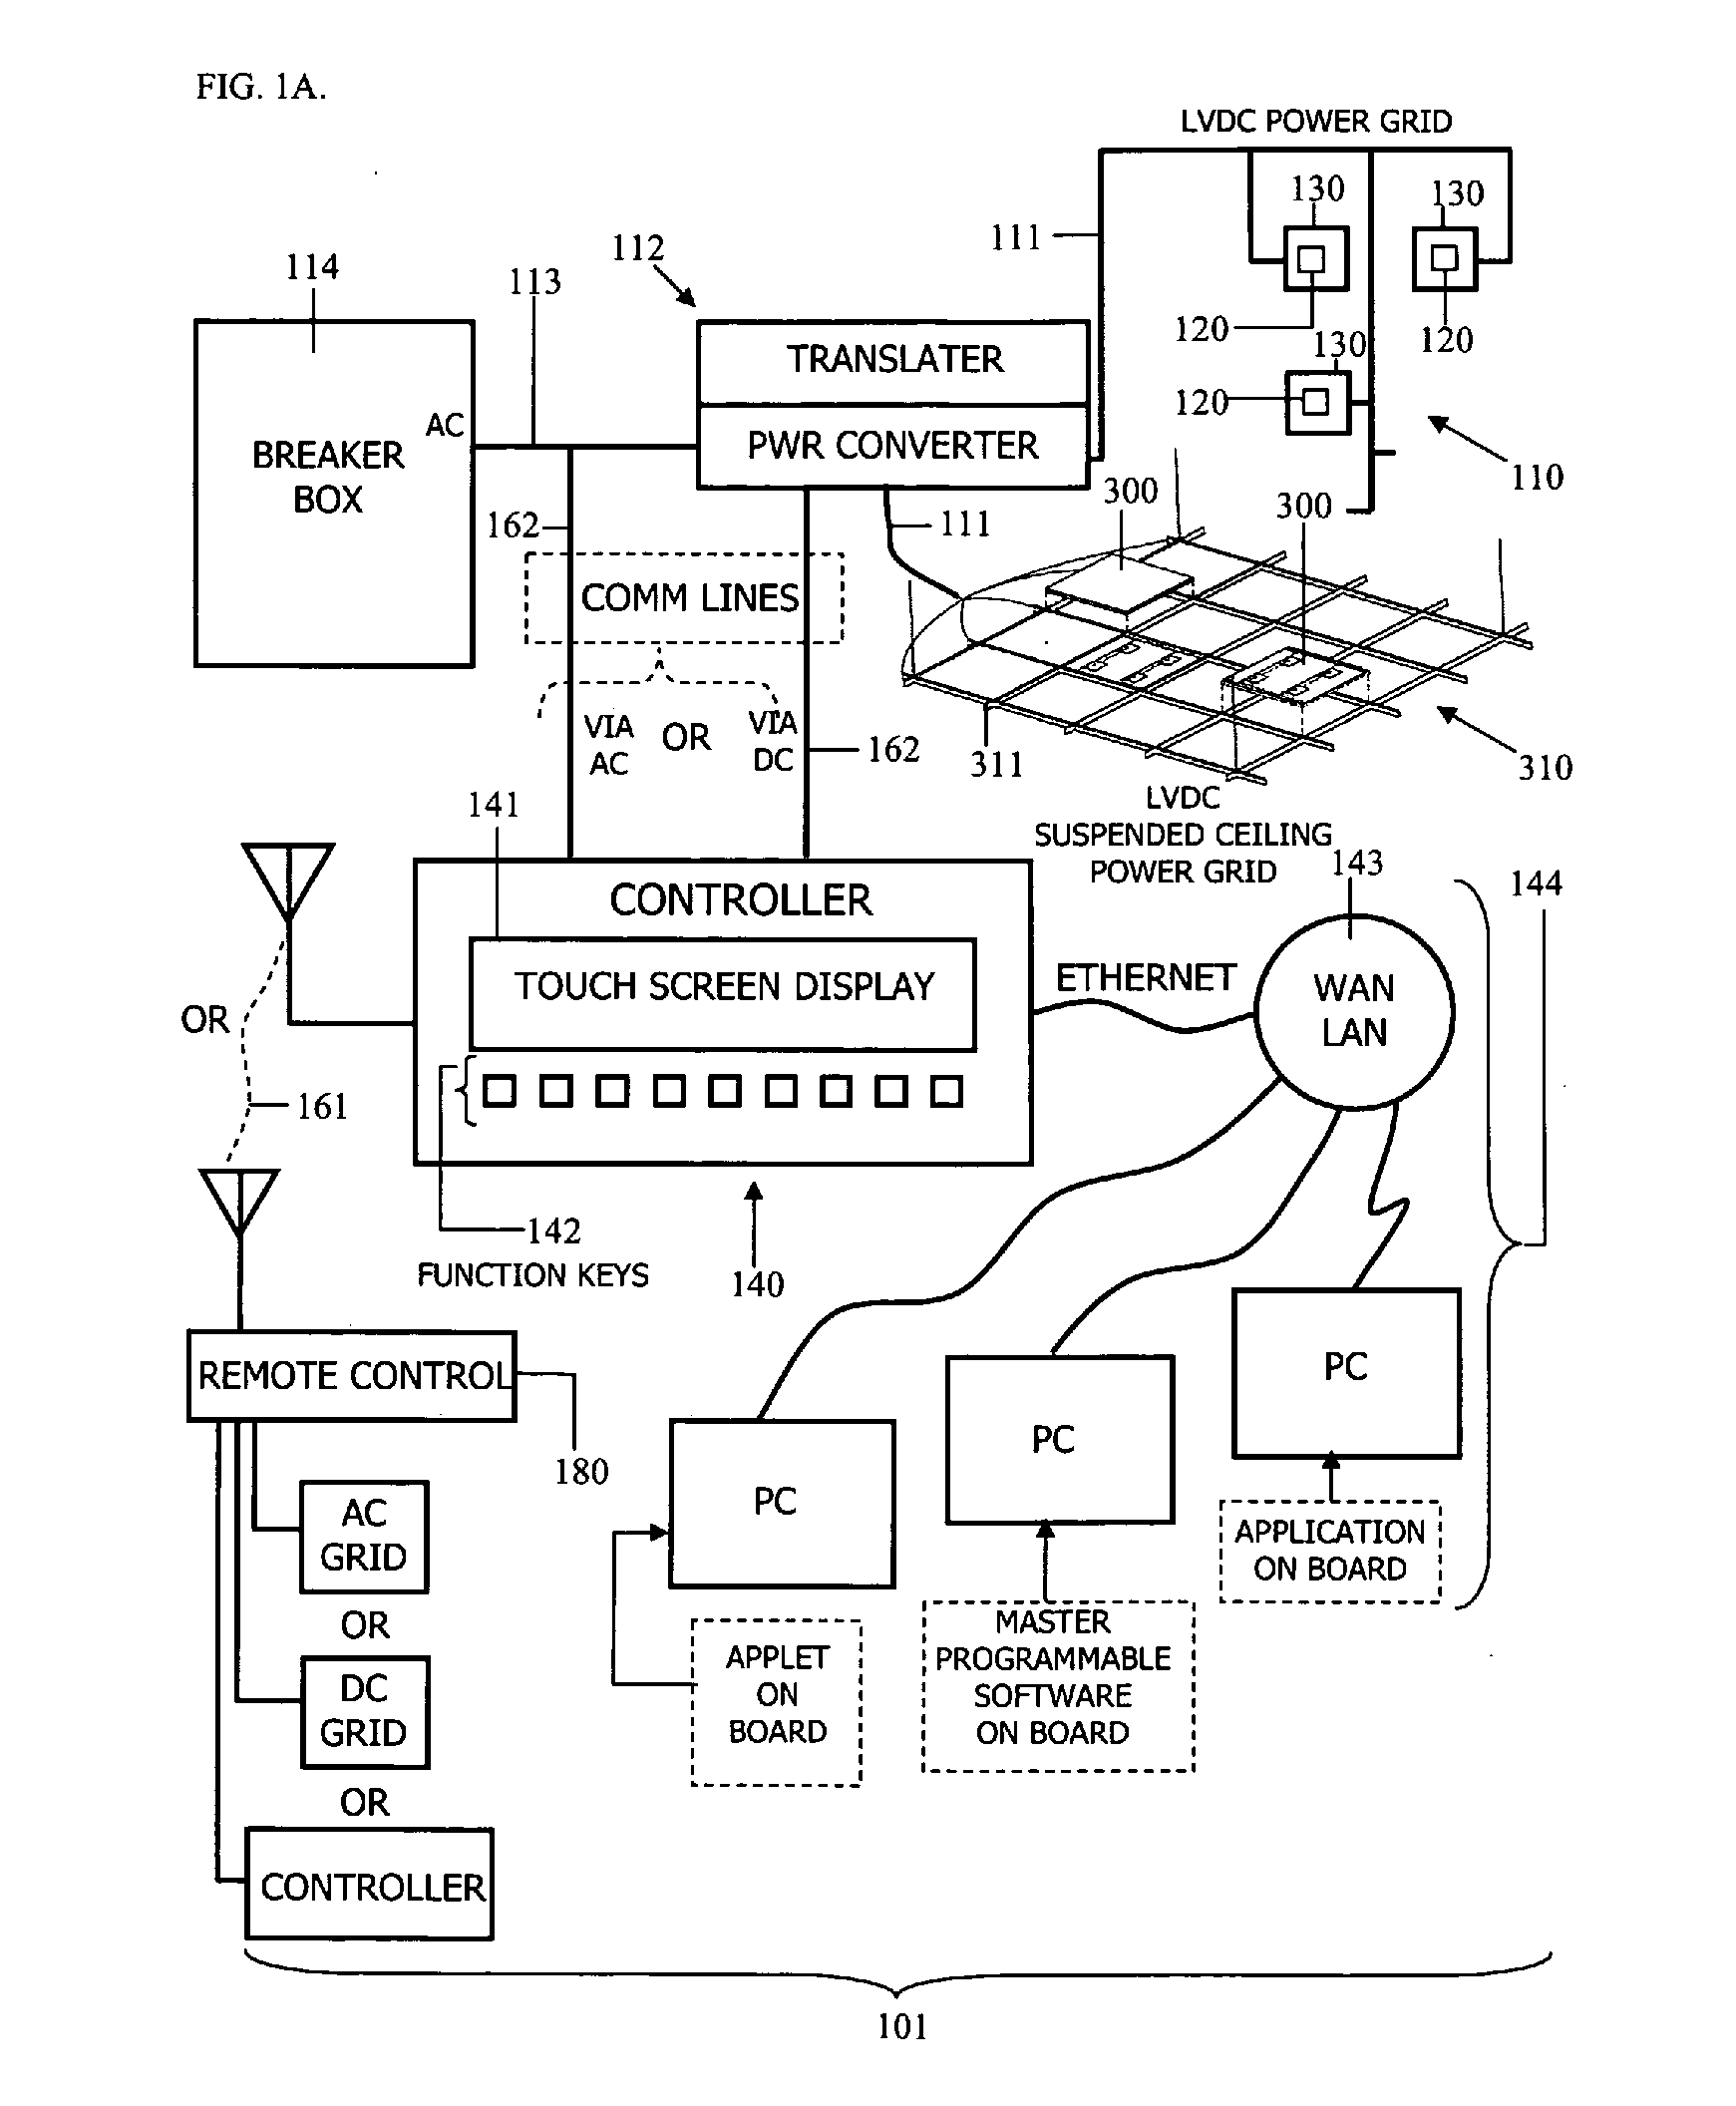 Distributed lighting control system